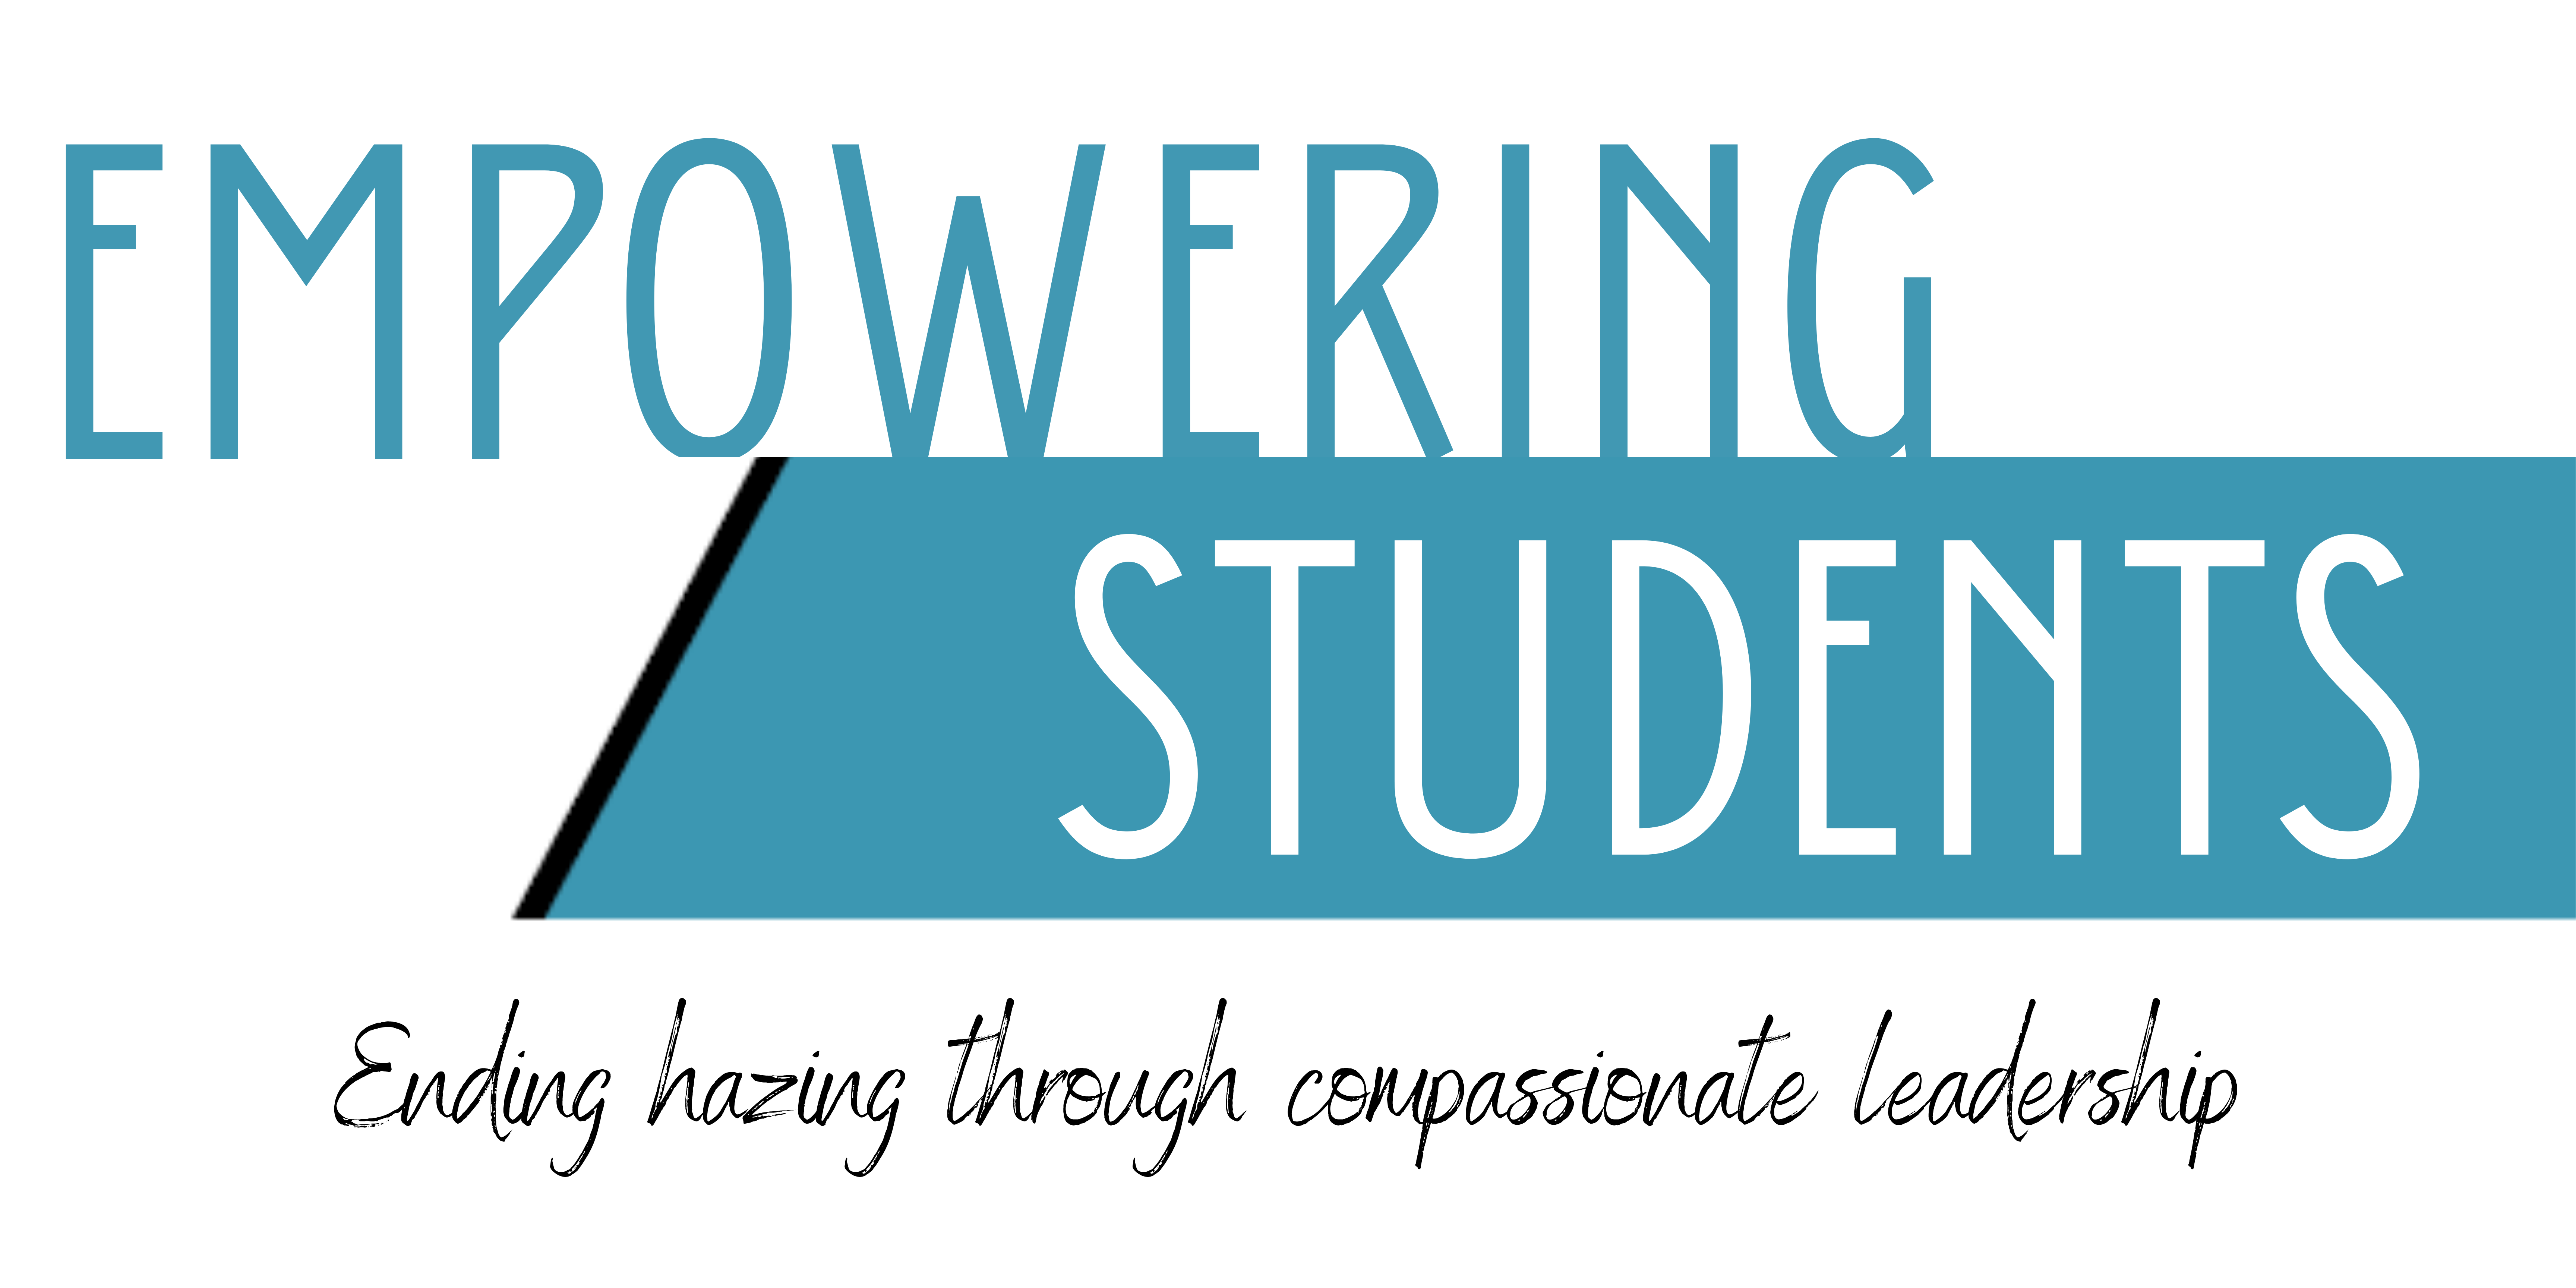 Empowering students